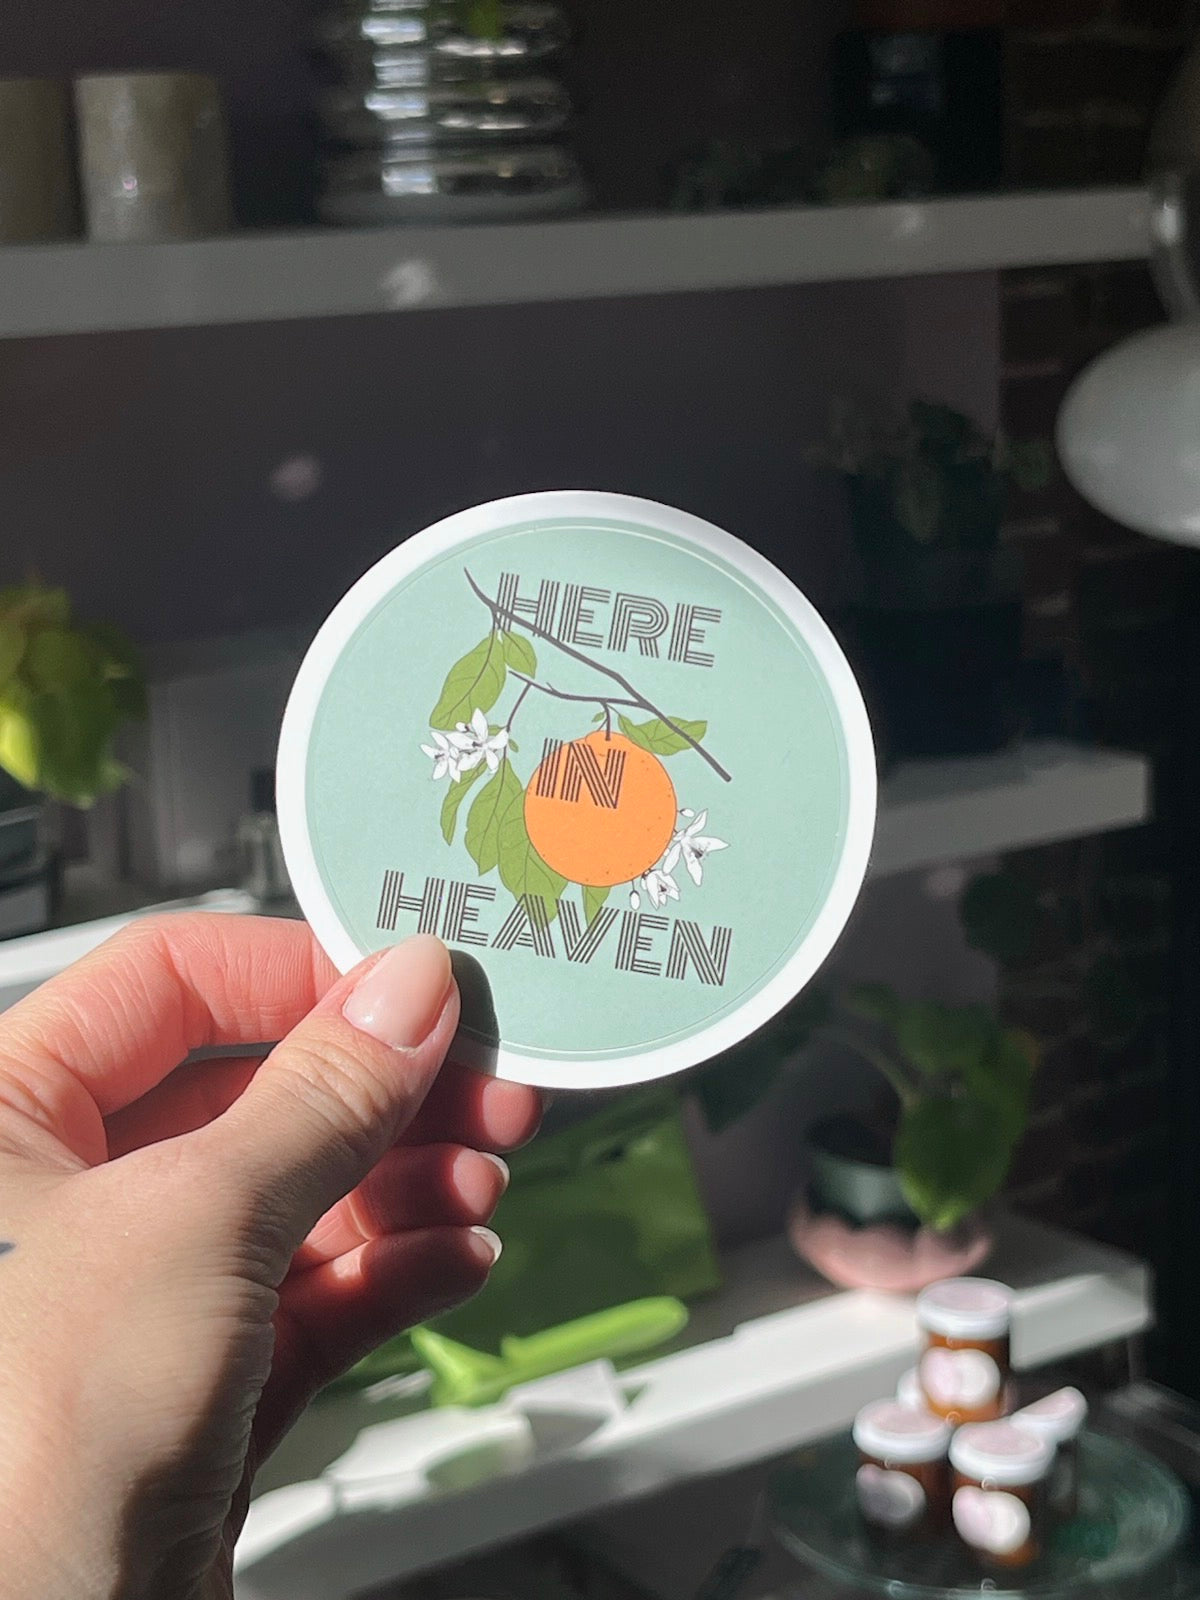 Here In Heaven Citrus Stickers by Catface